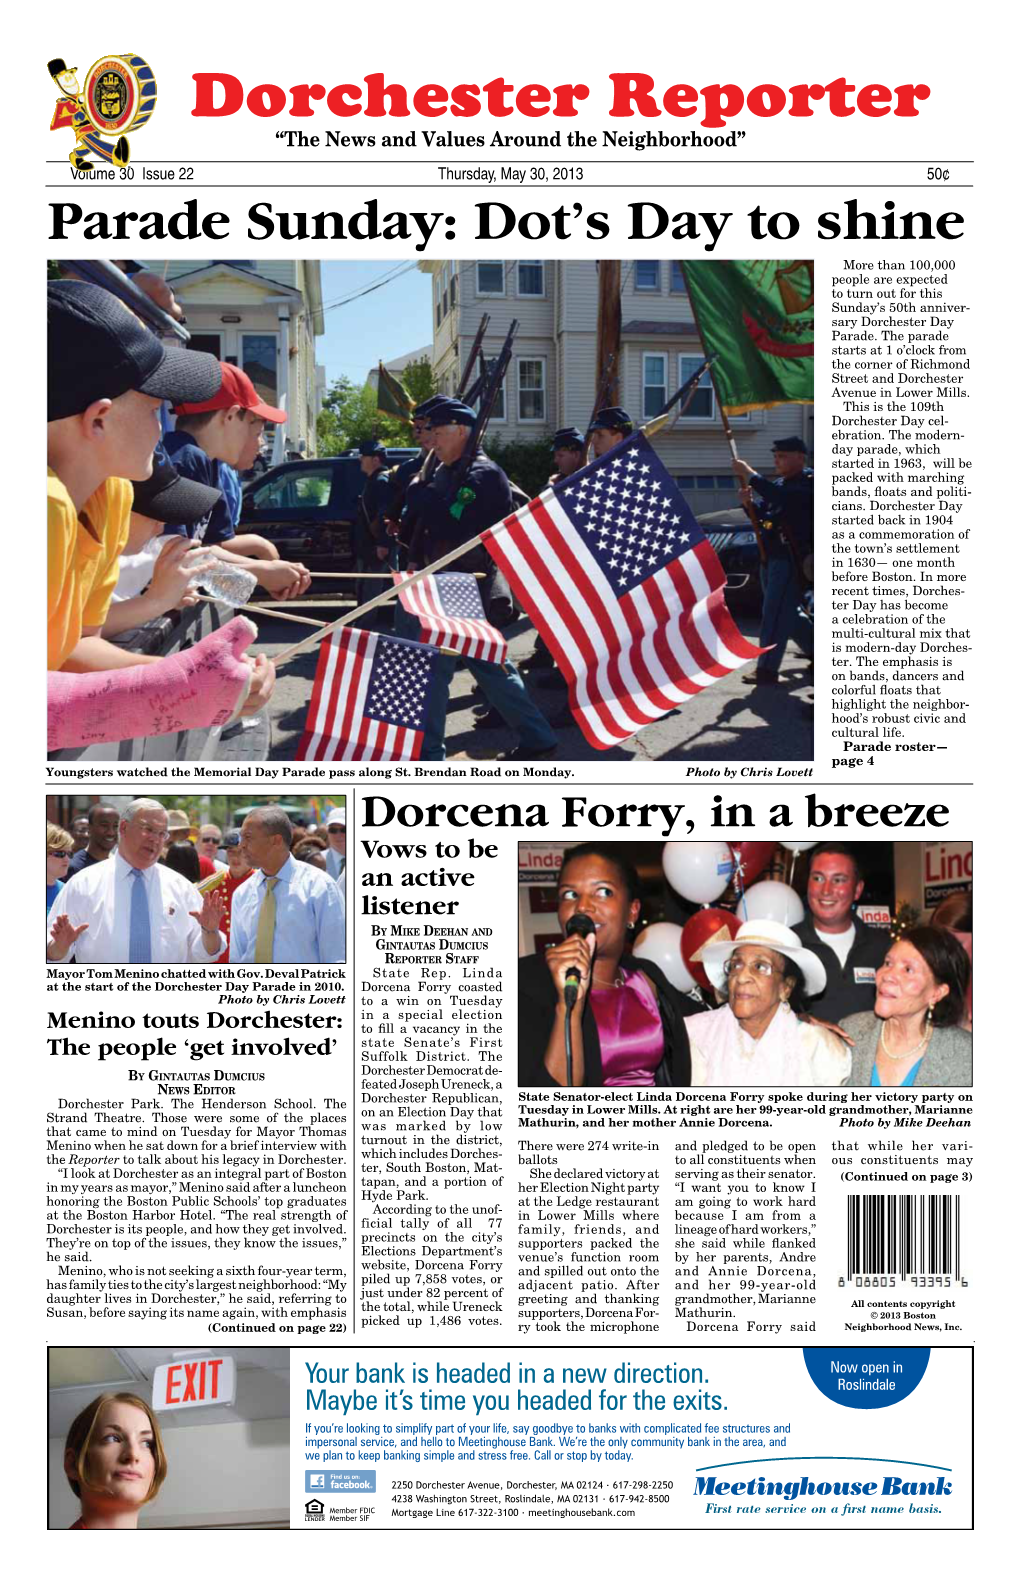 398 Neponset Ave, Dorchester, MA | (617) 2823200 | May 30, 2013 the Reporter Page 21